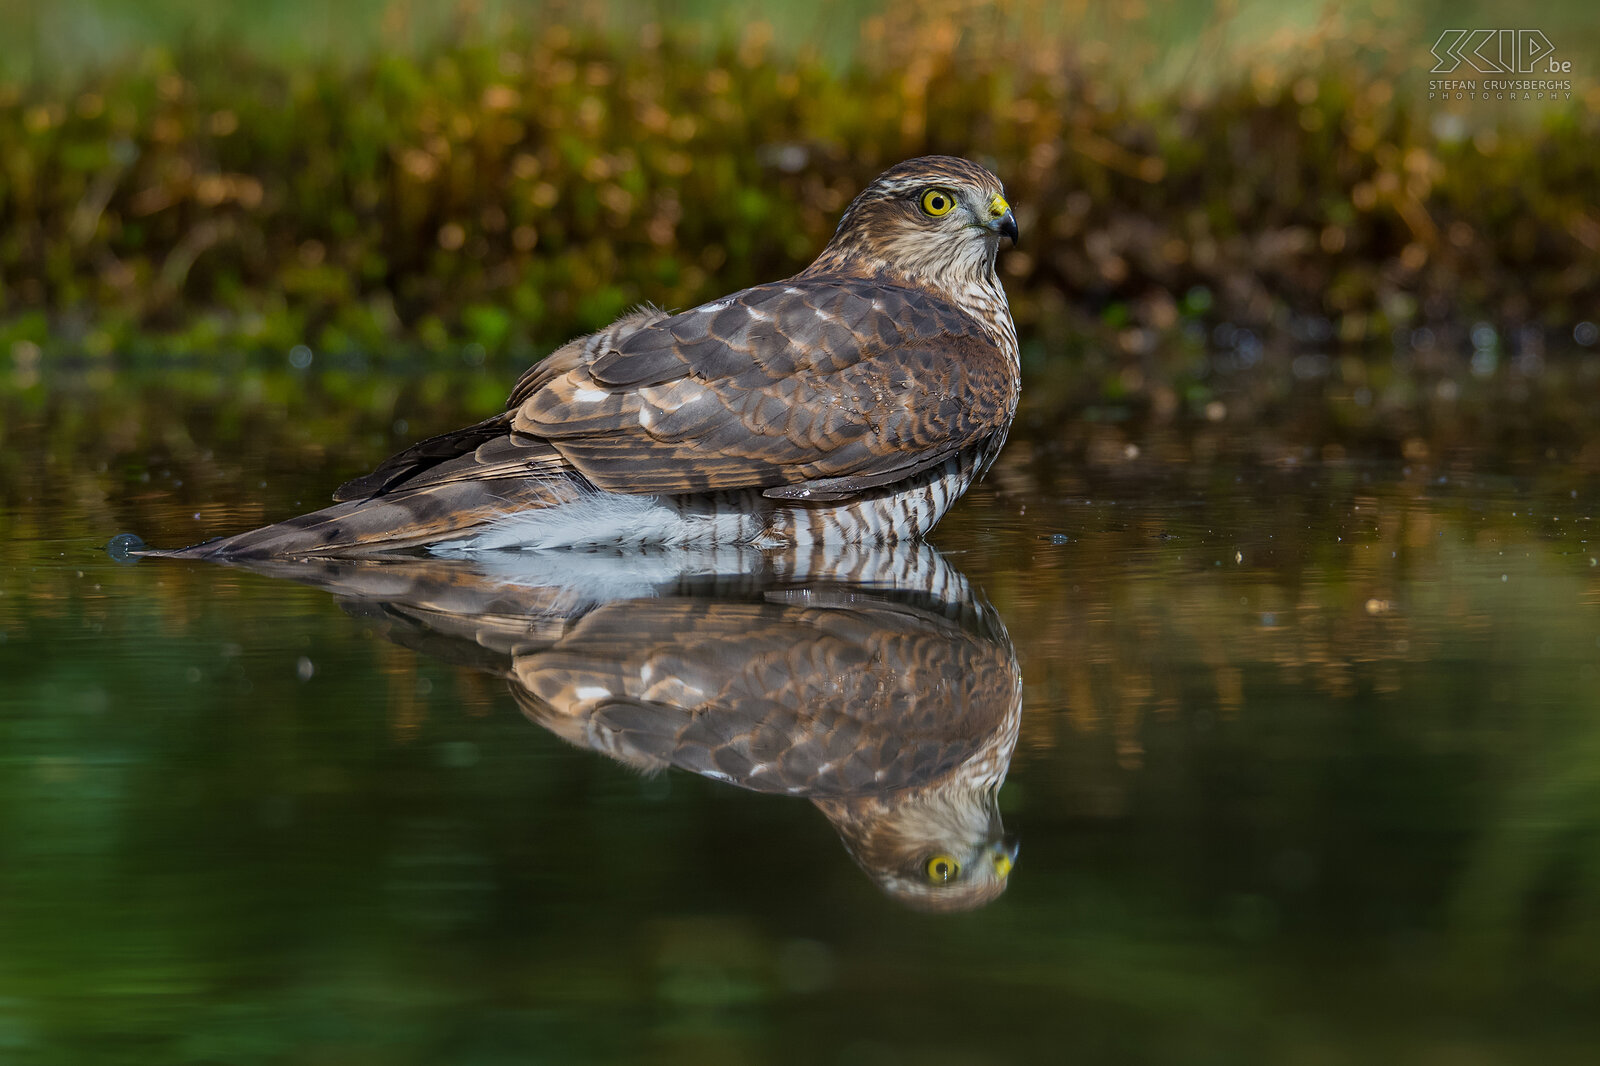 Birds of prey - Eurasian sparrowhawk The Eurasian sparrowhawk (Accipiter nisus) is slightly smaller than the goshawk and mainly hunts songbirds and lives in forests. On this image the sparrowhawk is taking a bath on a hot summerday. Stefan Cruysberghs